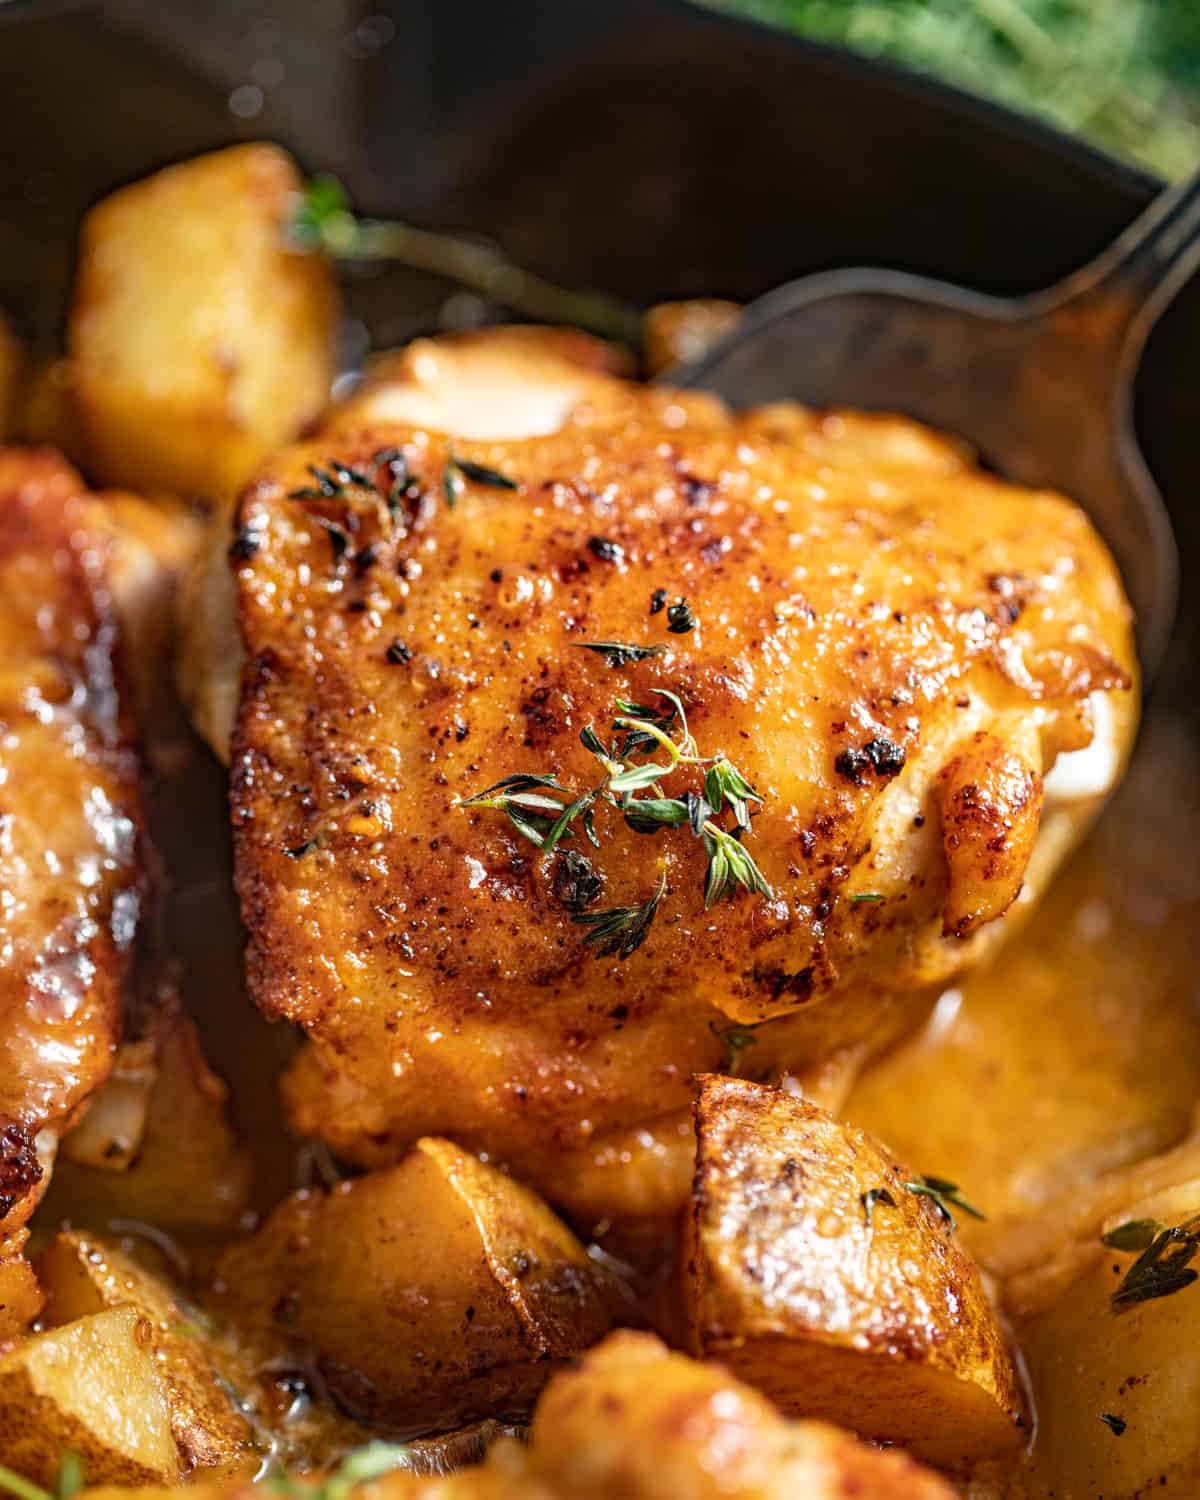 A spoon scooping up a maple dijon chicken thigh.